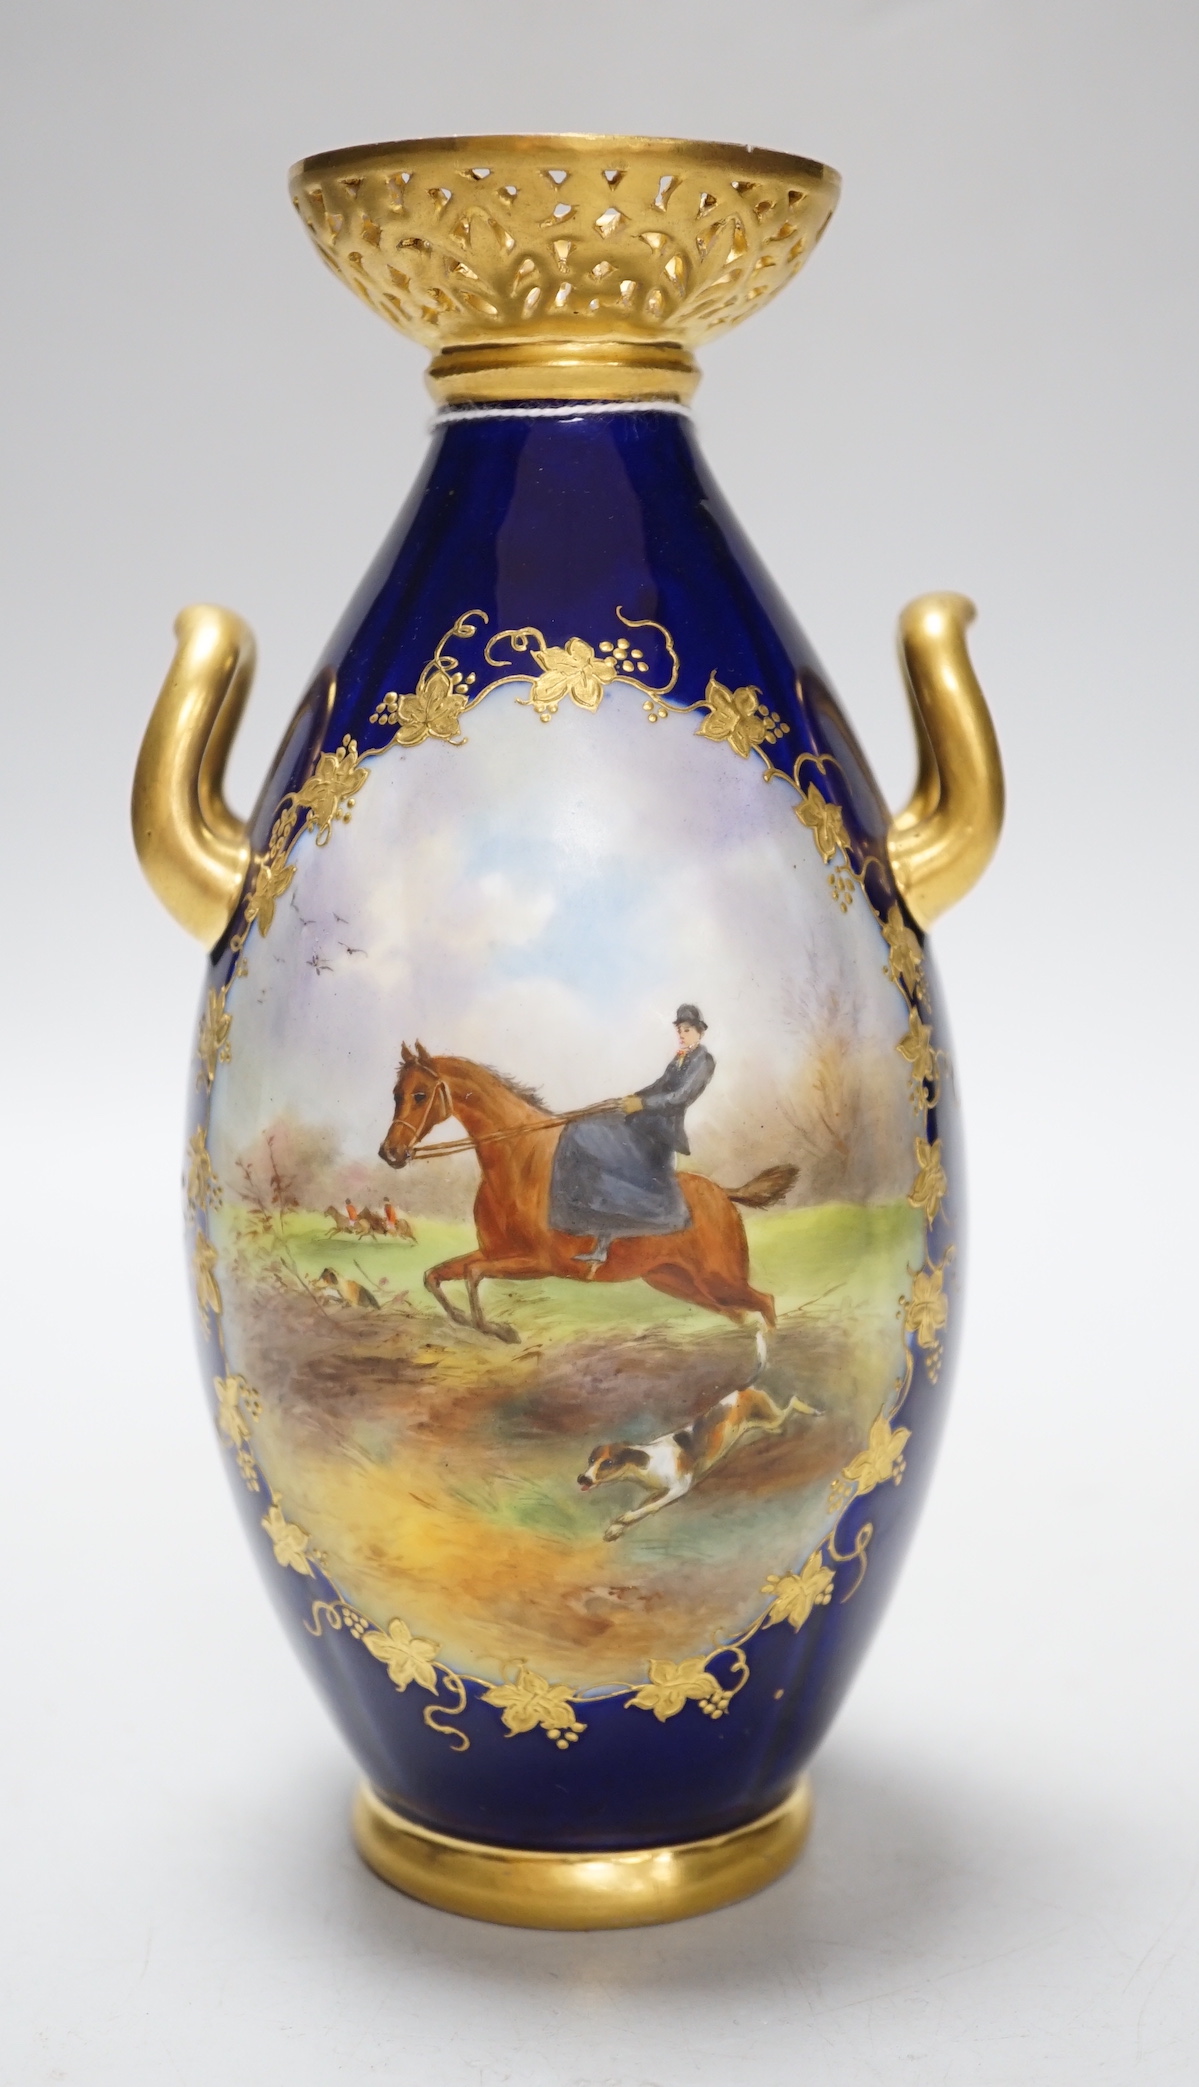 A Grainger & Co. Worcester two handled vase painted with a fox hunting scene in a raised gilt panel on a cobalt blue ground, having a reticulated gilt neck, date mark 1898, 19cm high